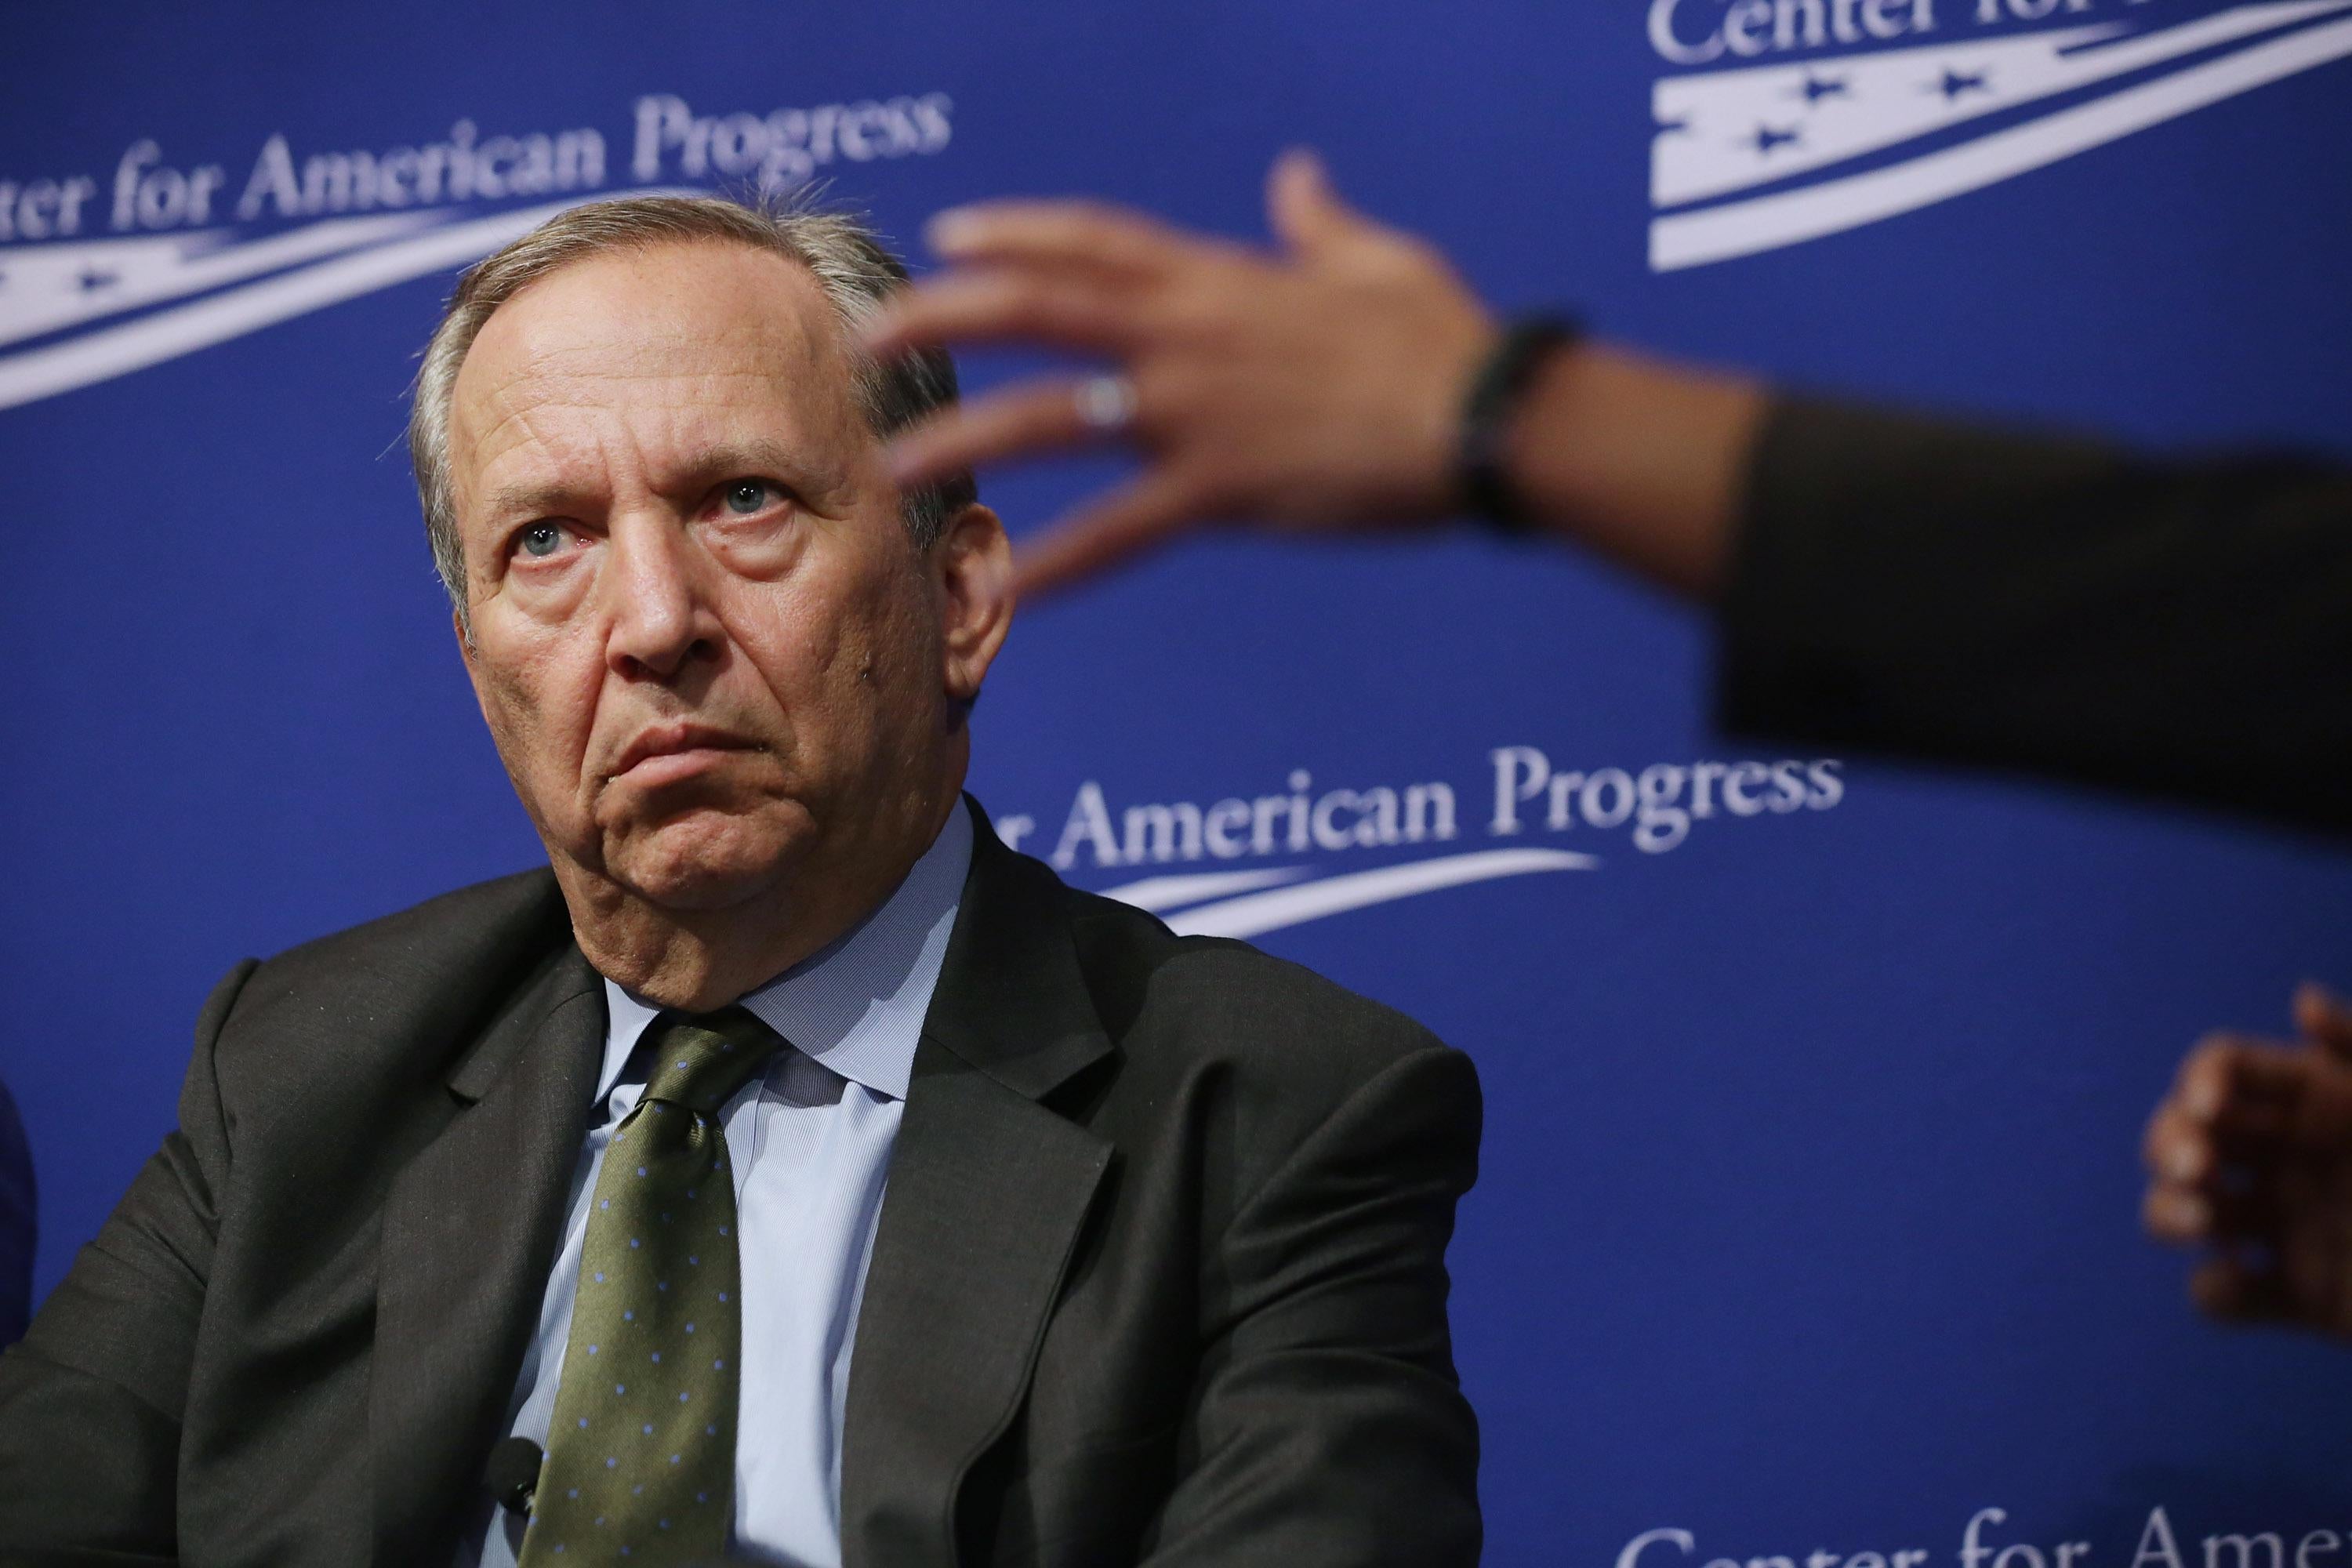 Larry Summers at a Center for American Progress event.